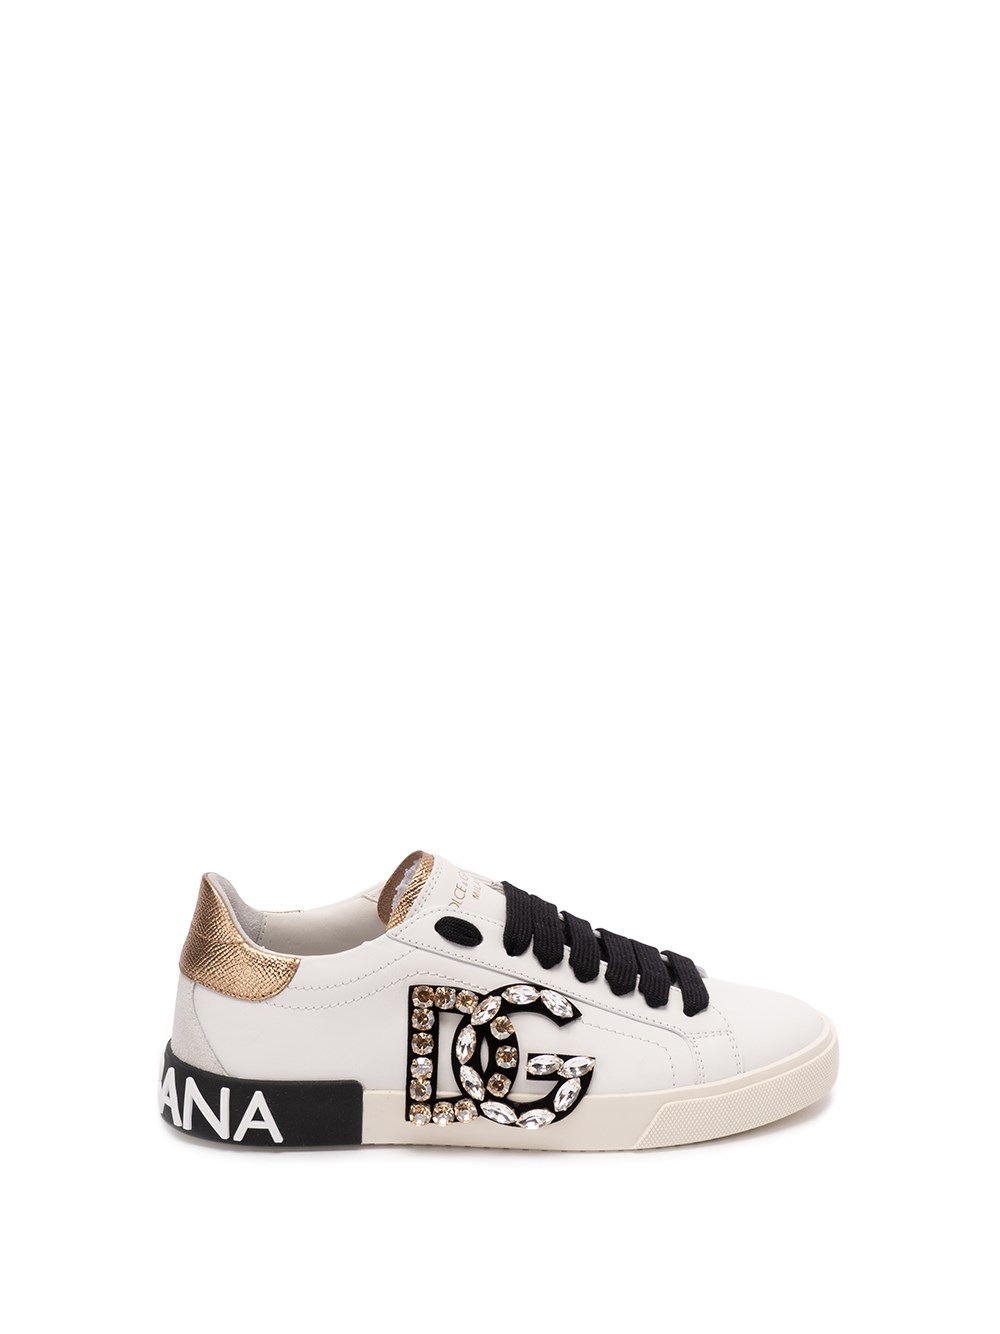 DOLCE & GABBANA LEATHER VINTAGE SNEAKERS WITH DG LOGO